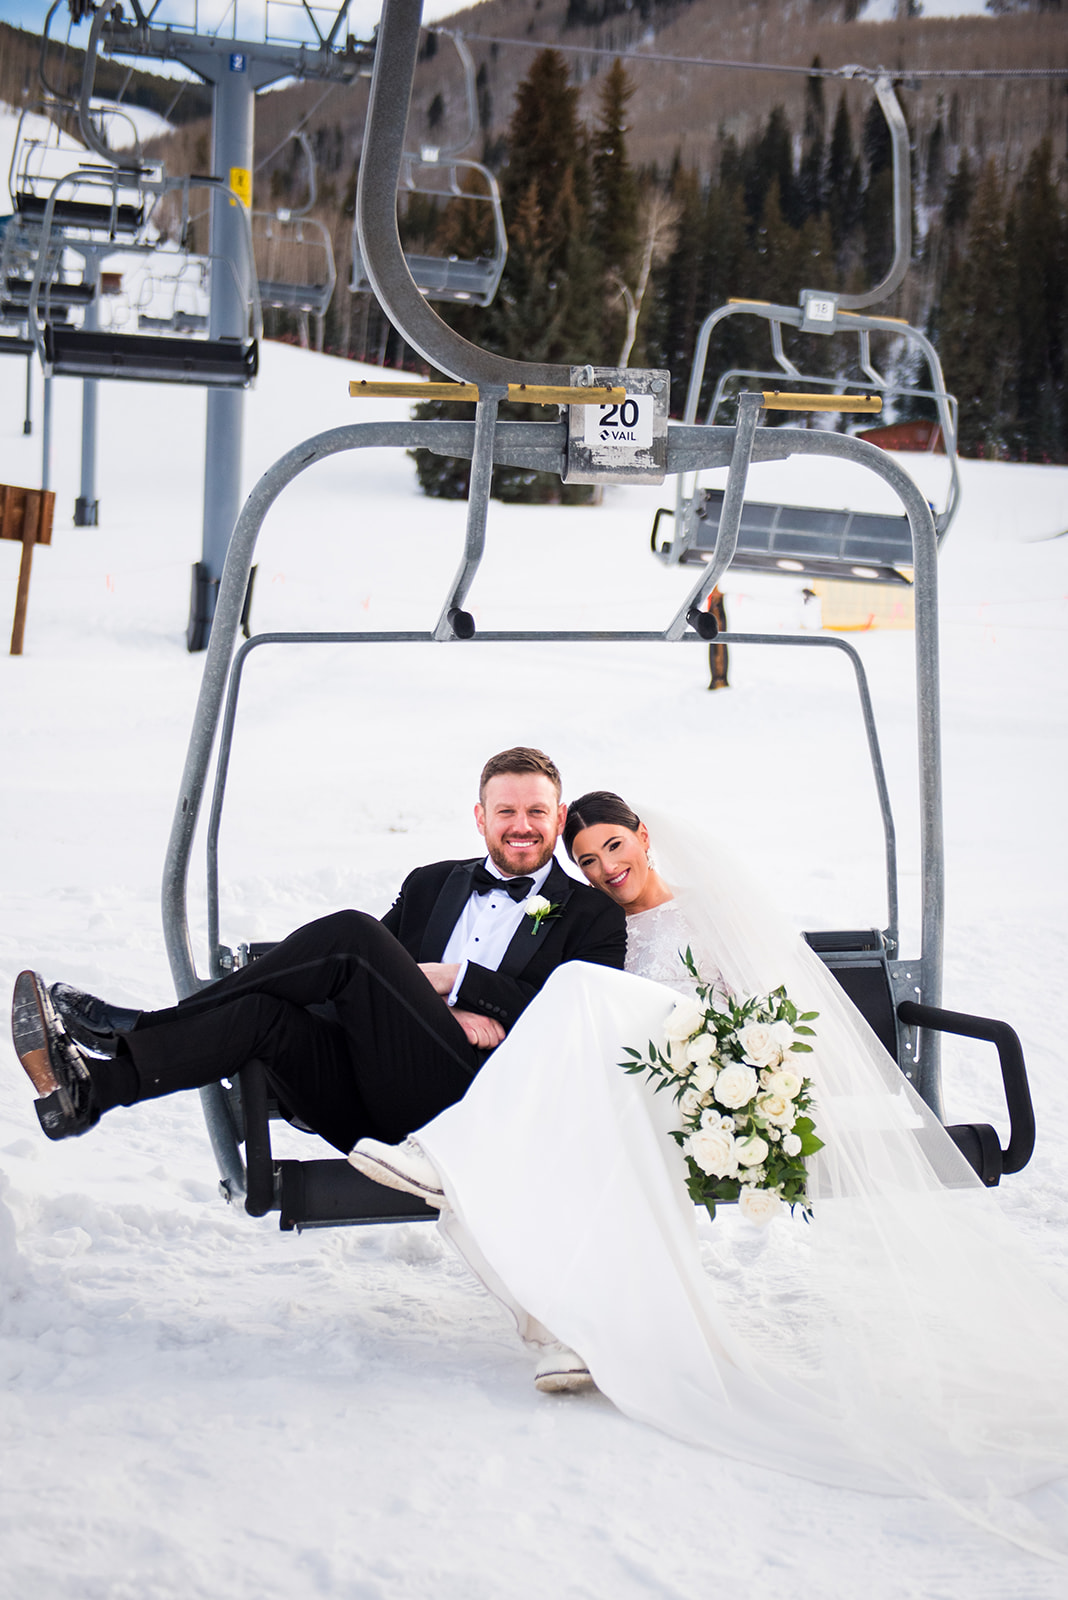 Bride and groom sit relaxed and smiling on a ski lift in Vail, Colorado.